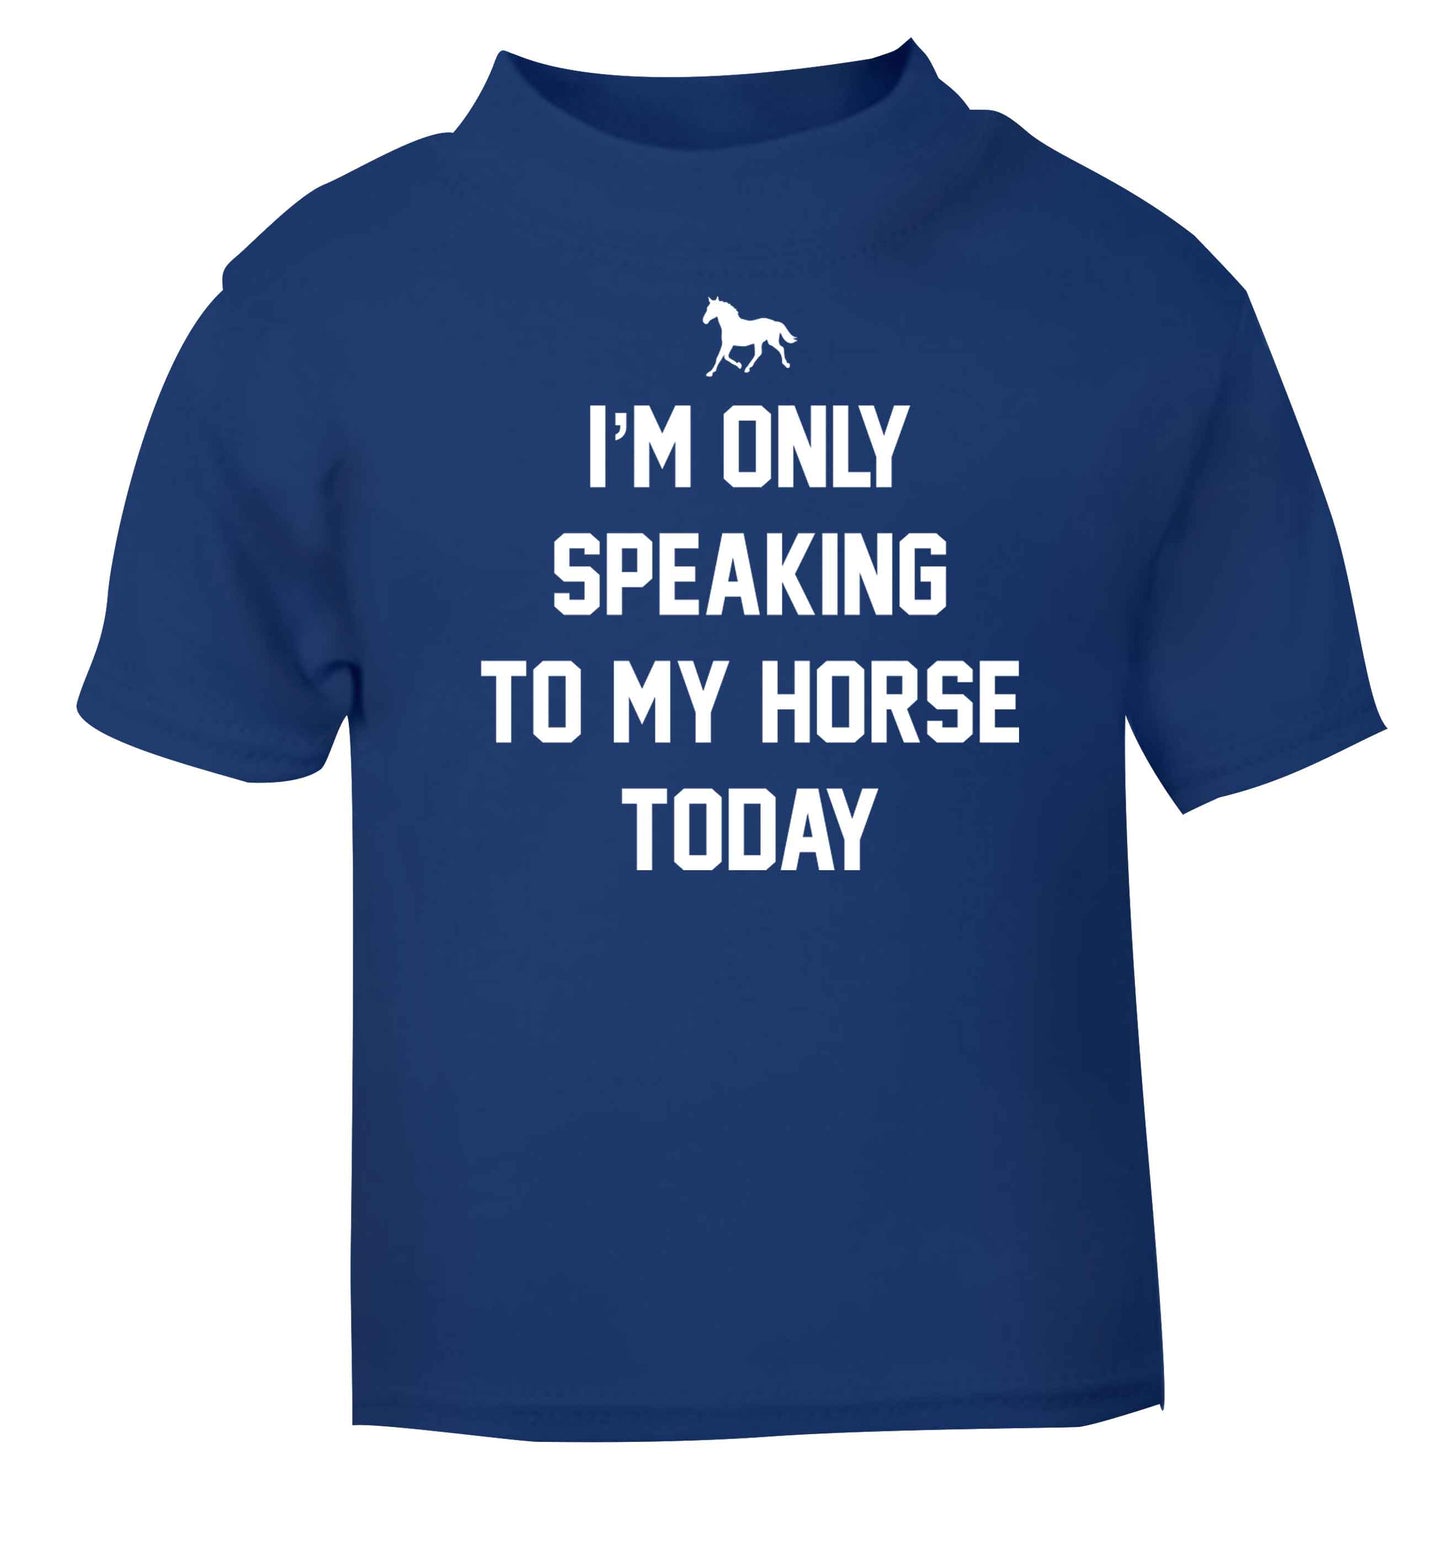 I'm only speaking to my horse today blue baby toddler Tshirt 2 Years